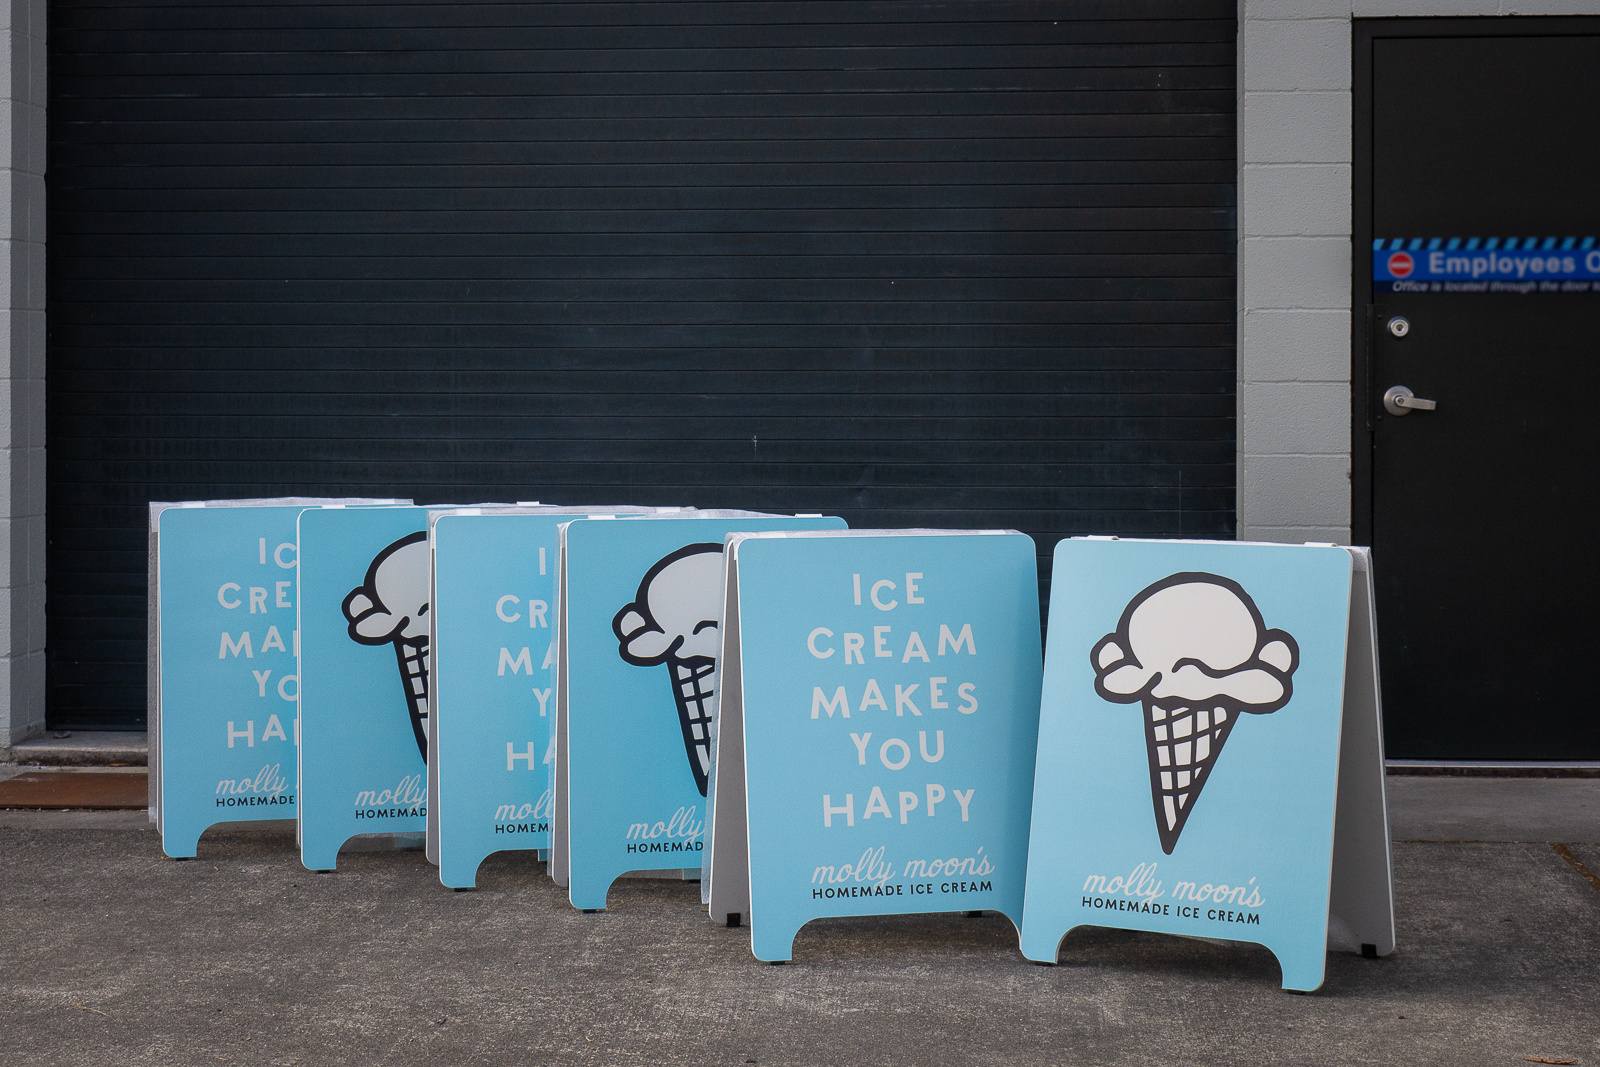 Two pale blue A-Frames that show either an ice cream cone or say "Ice Cream Makes You Happy" that Studio 3 Signs in Ballard produced for Molly Moon's.